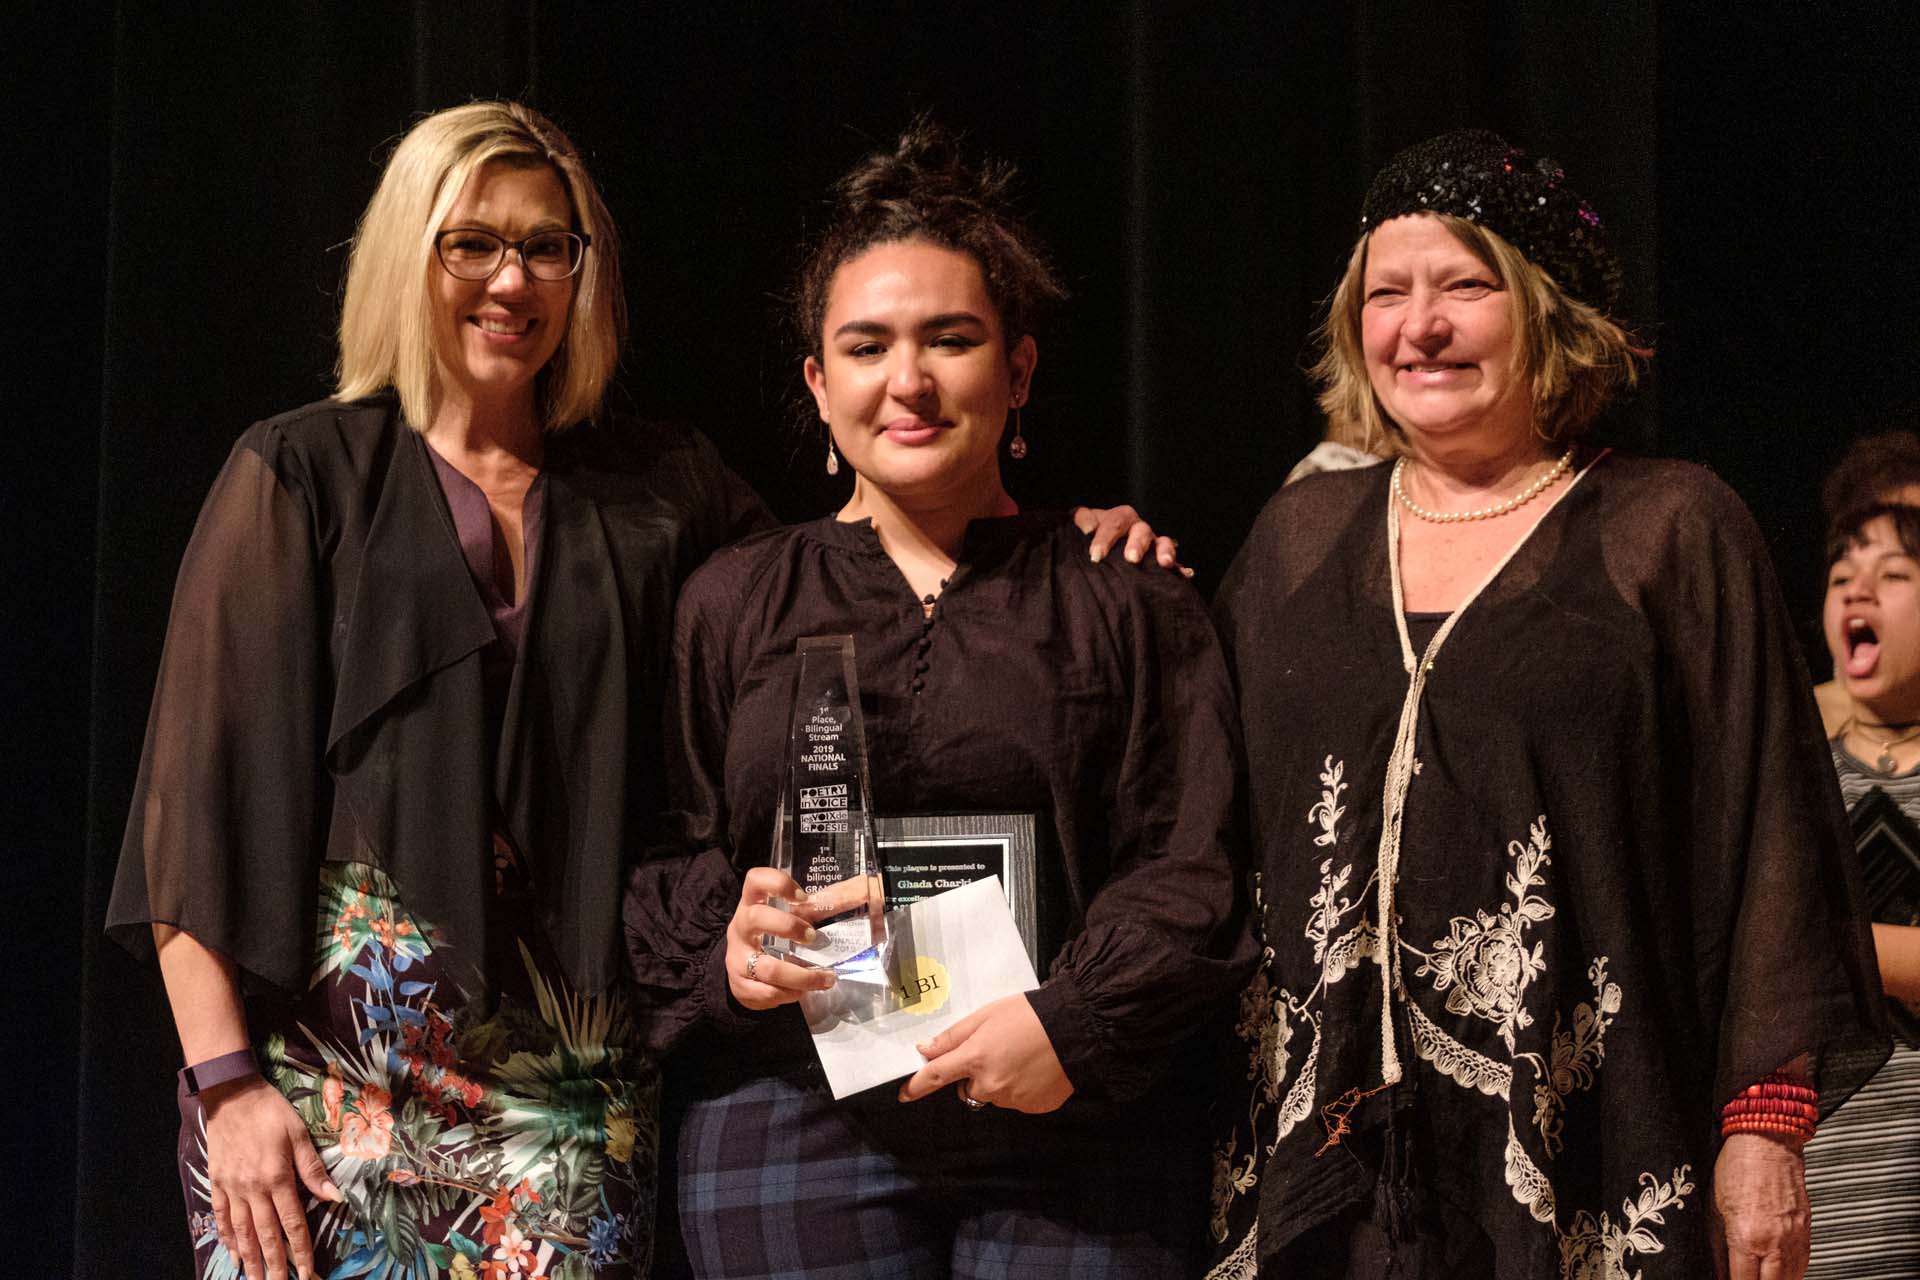 Minister Squires and Di Brandt present a trophy to each champion. Ghada Charki receives the first prize in the Bilingual Stream.